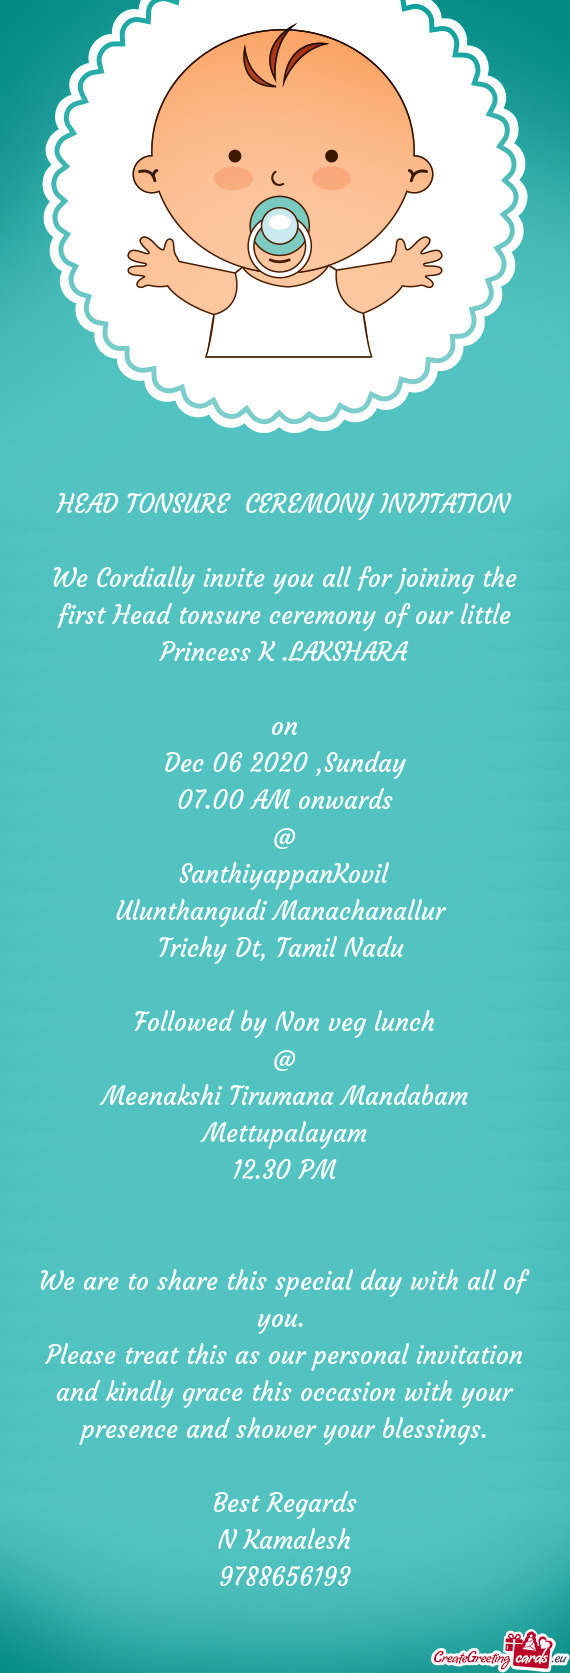 We Cordially invite you all for joining the first Head tonsure ceremony of our little Princess K .LA